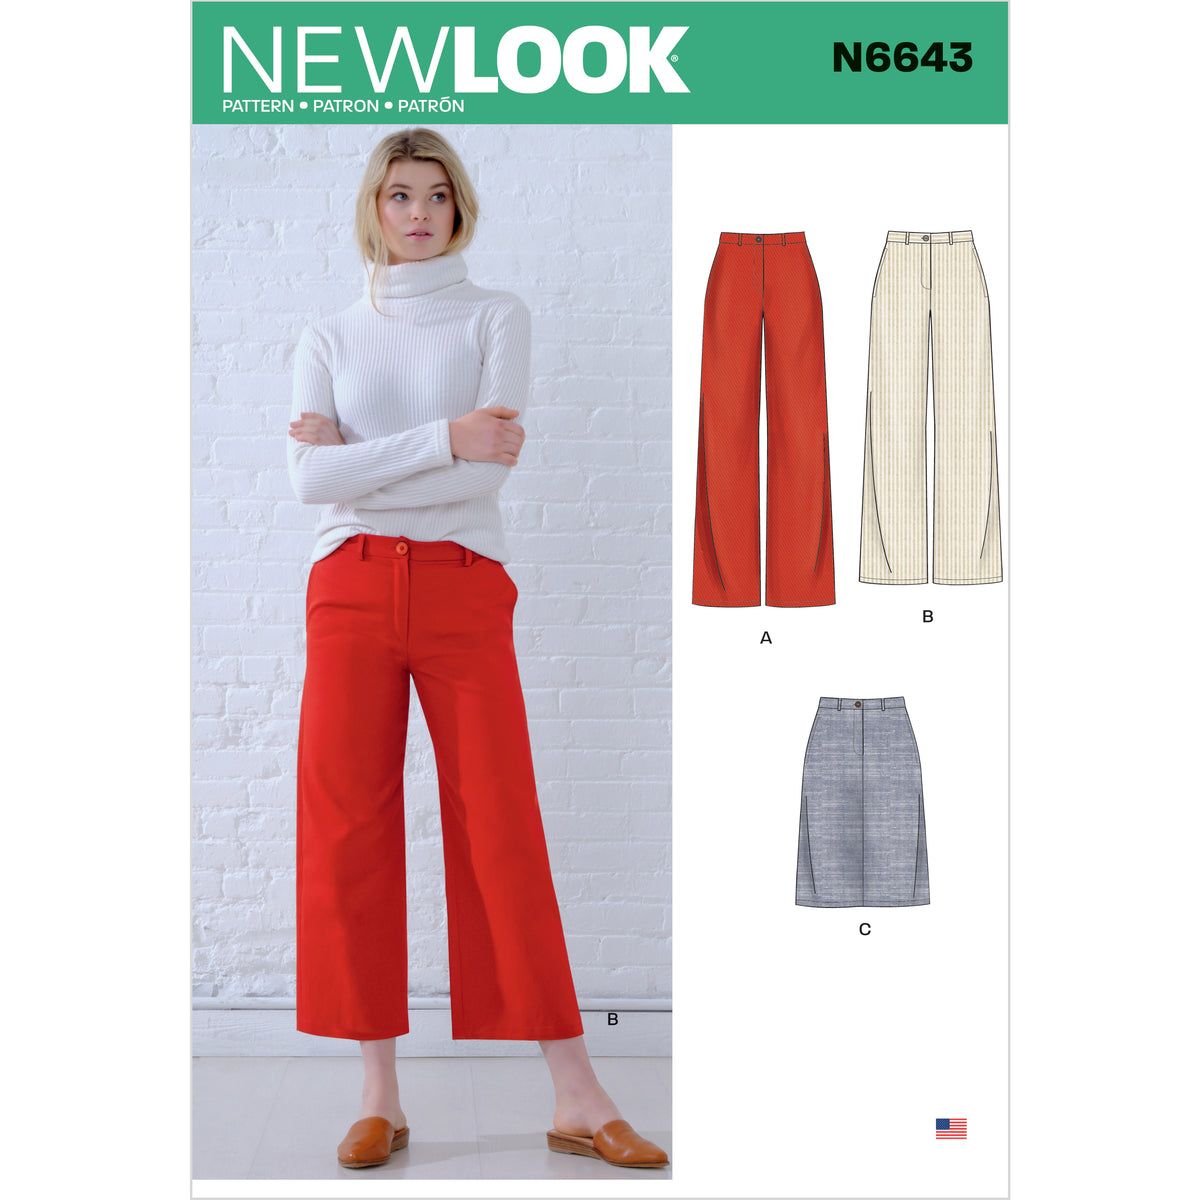 6643 New Look Sewing Pattern N6643 Misses' Wide Leg Pants and Skirt